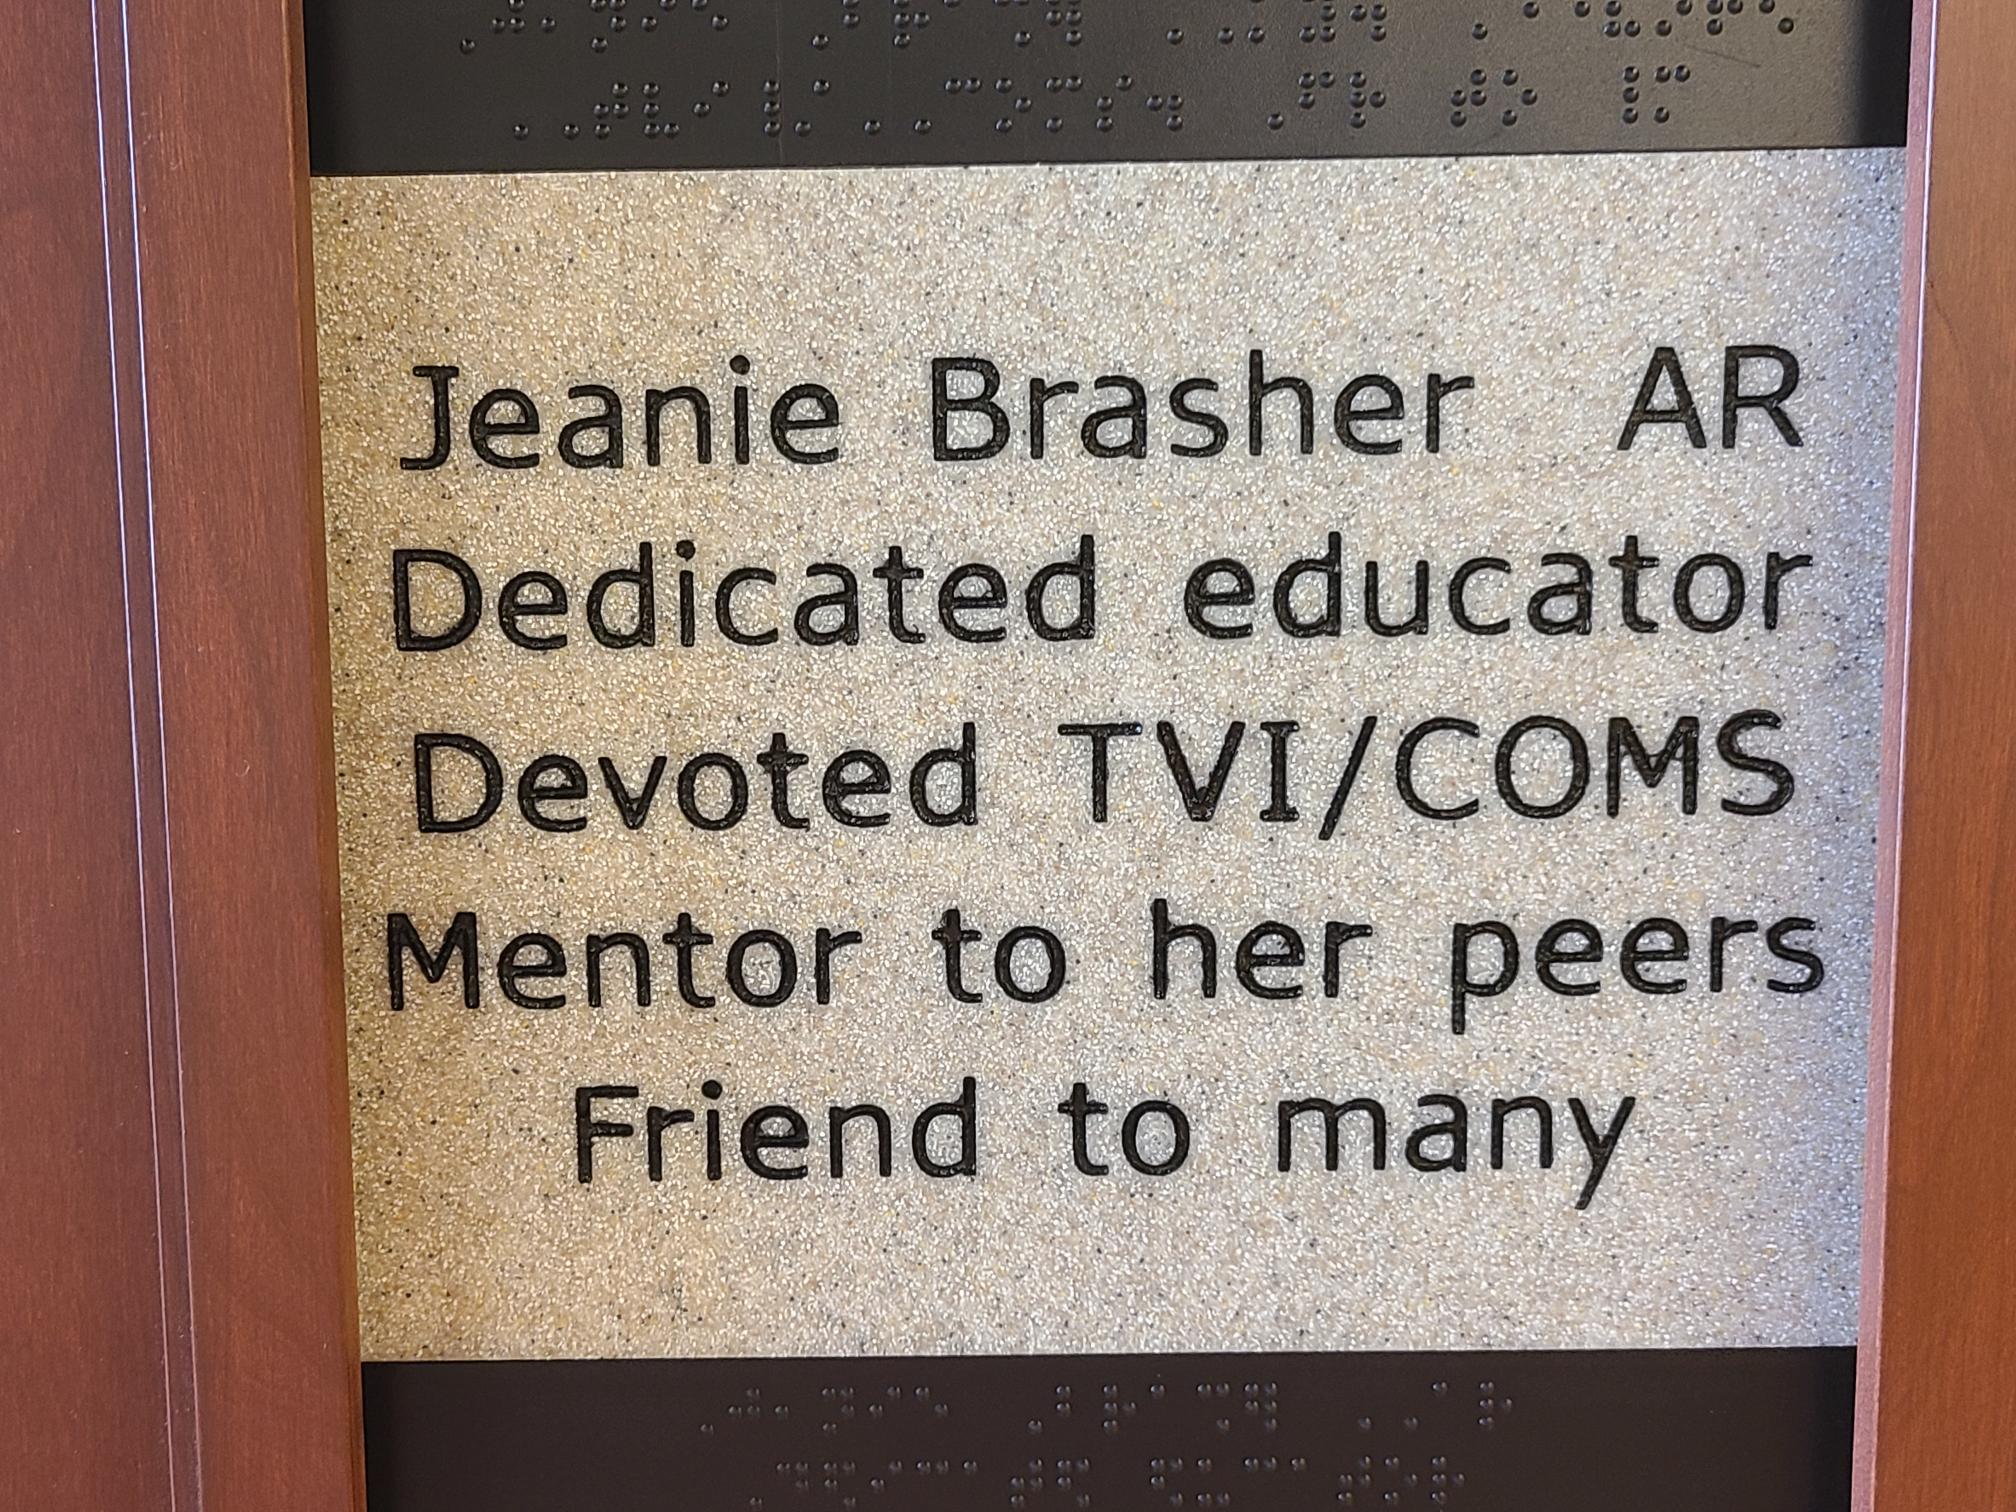 Jeanie Brasher AR, Dedicated educator, Devoted TVI/COMS, Mentor to her peers, Friend to many